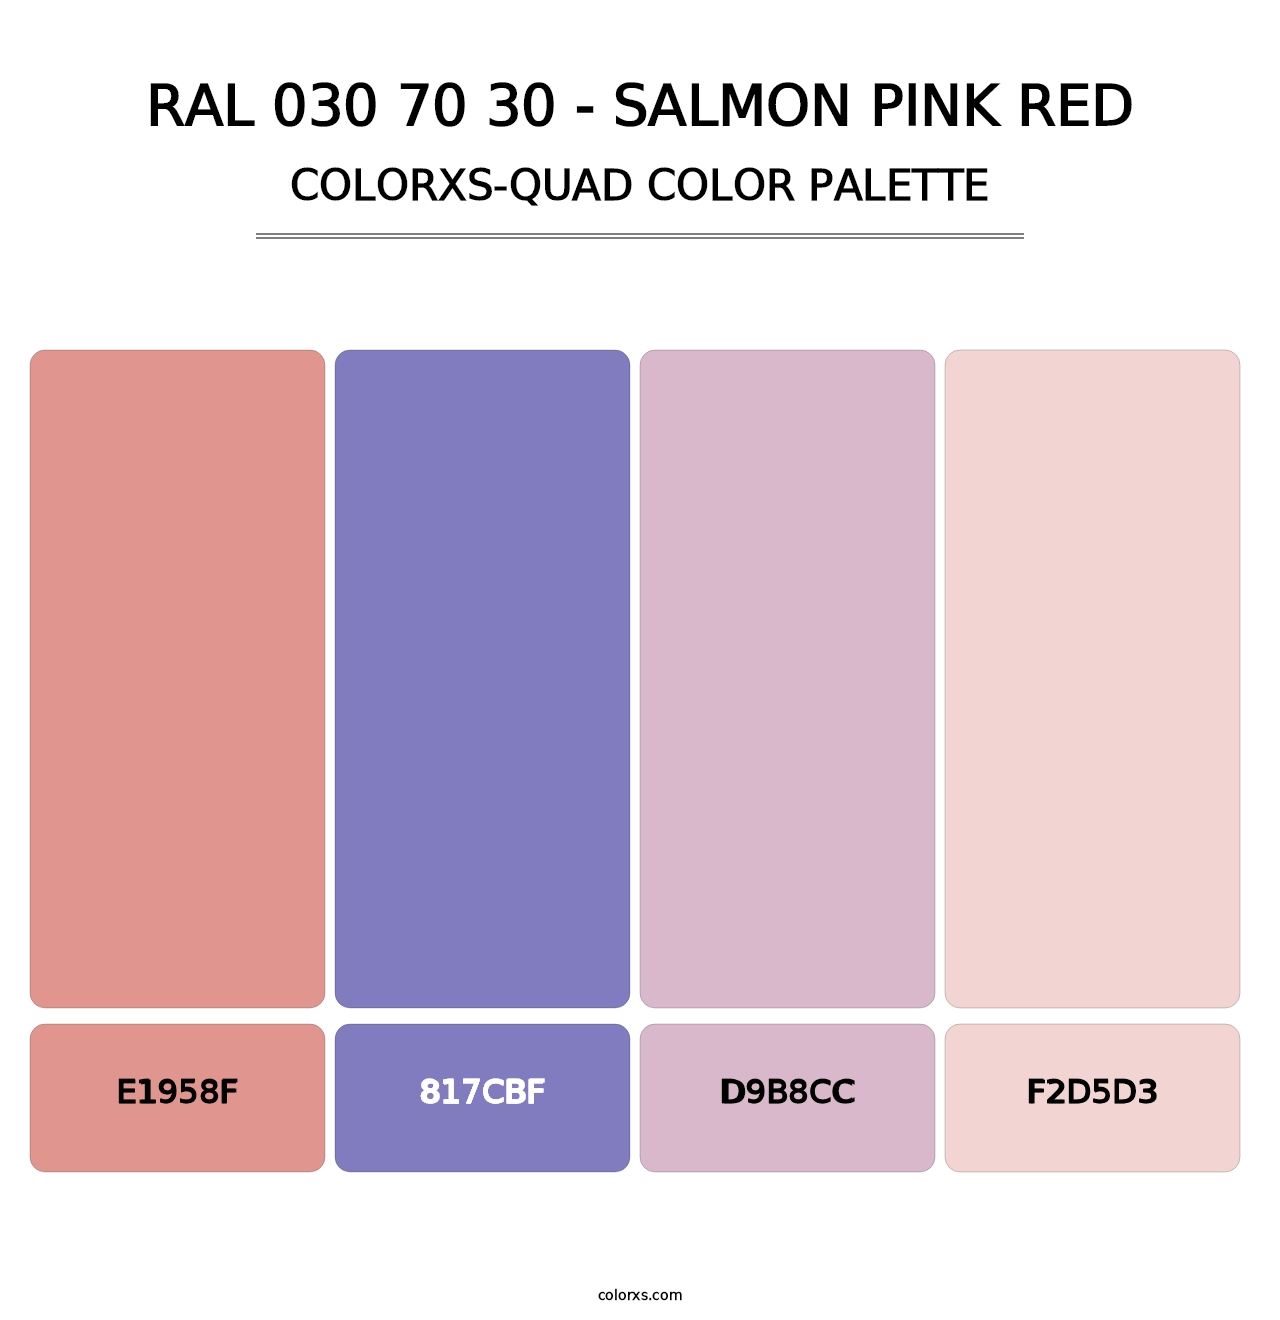 RAL 030 70 30 - Salmon Pink Red - Colorxs Quad Palette